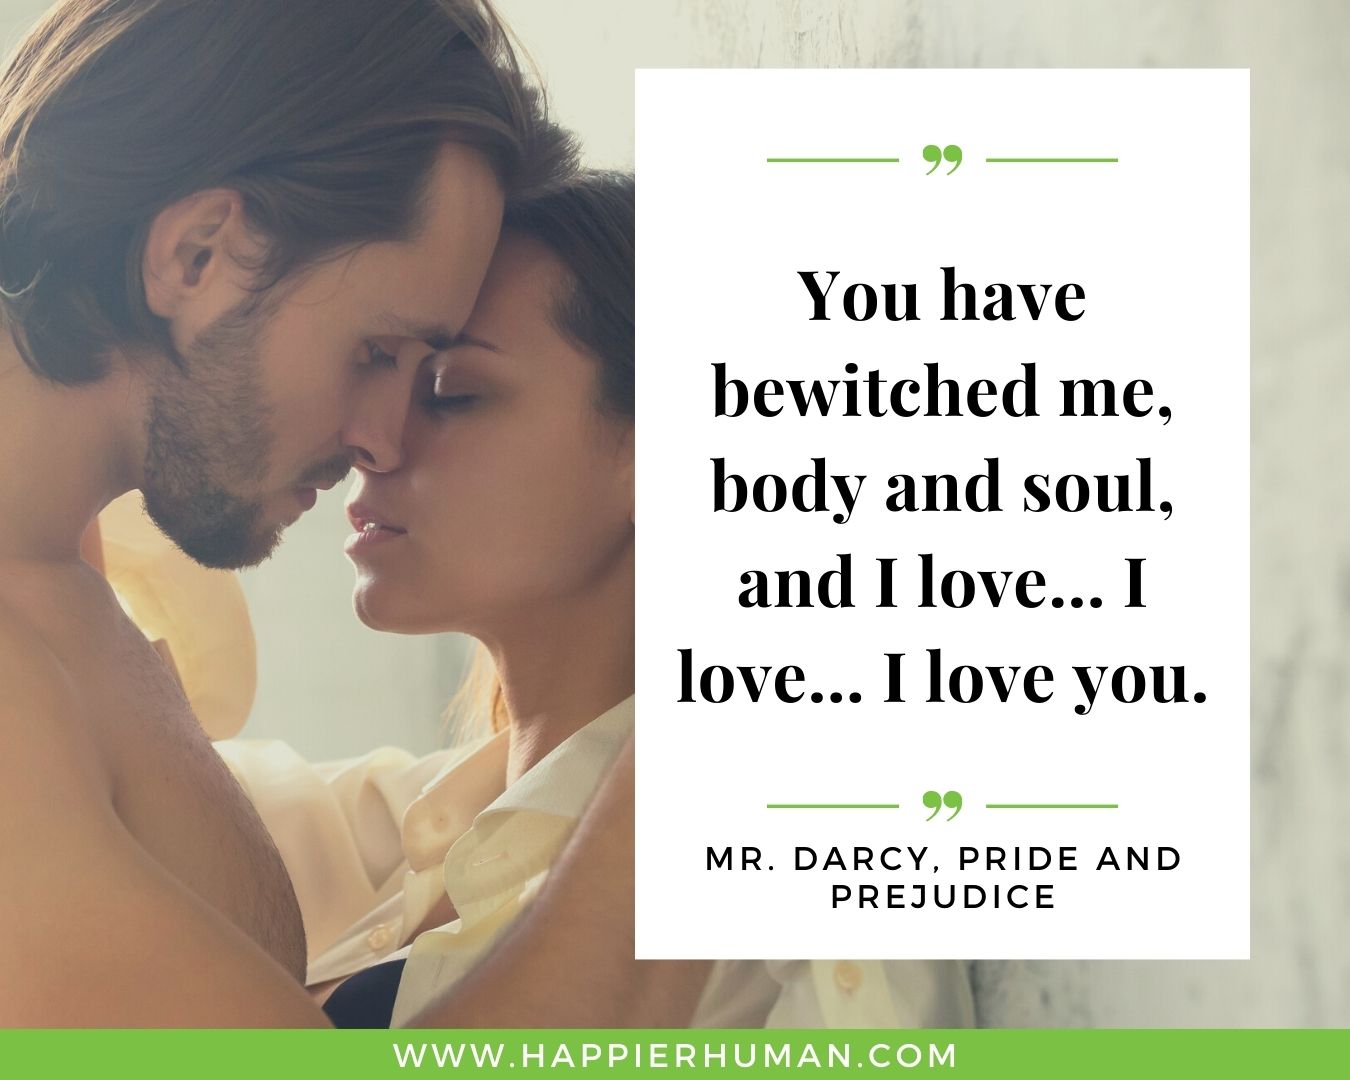 Sweet and Romantic Love Quotes for Her - “You have bewitched me, body and soul, and I love… I love… I love you.” – Mr. Darcy, Pride and Prejudice